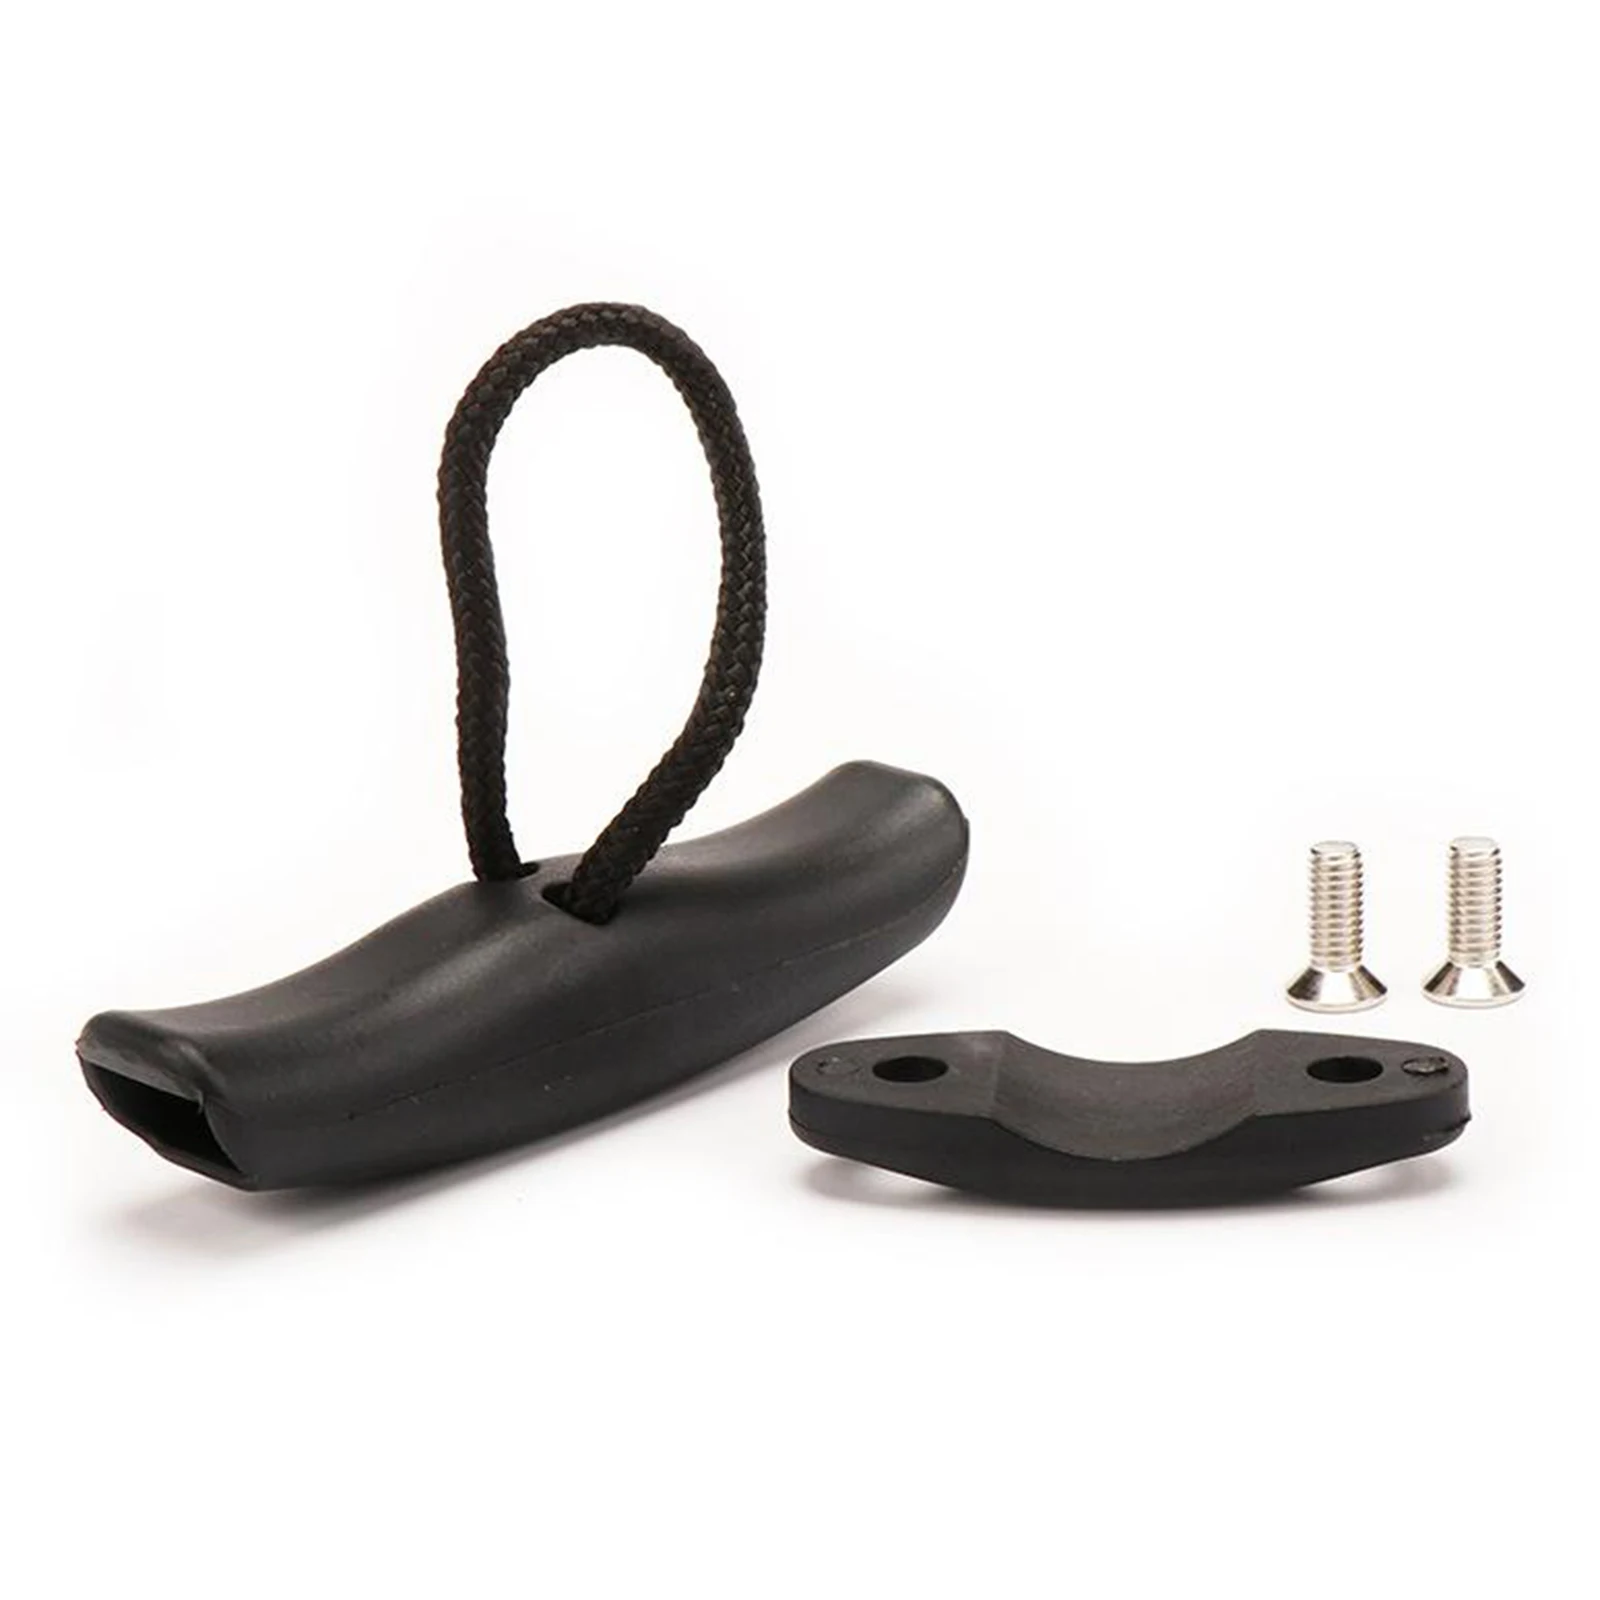 2pcs Nylon Kayak Pull Handle Canoe T-Handle Pad Eyes Toggle w/ Bungee Cord Toggle Handle Rope Canoe Carrying Accessories